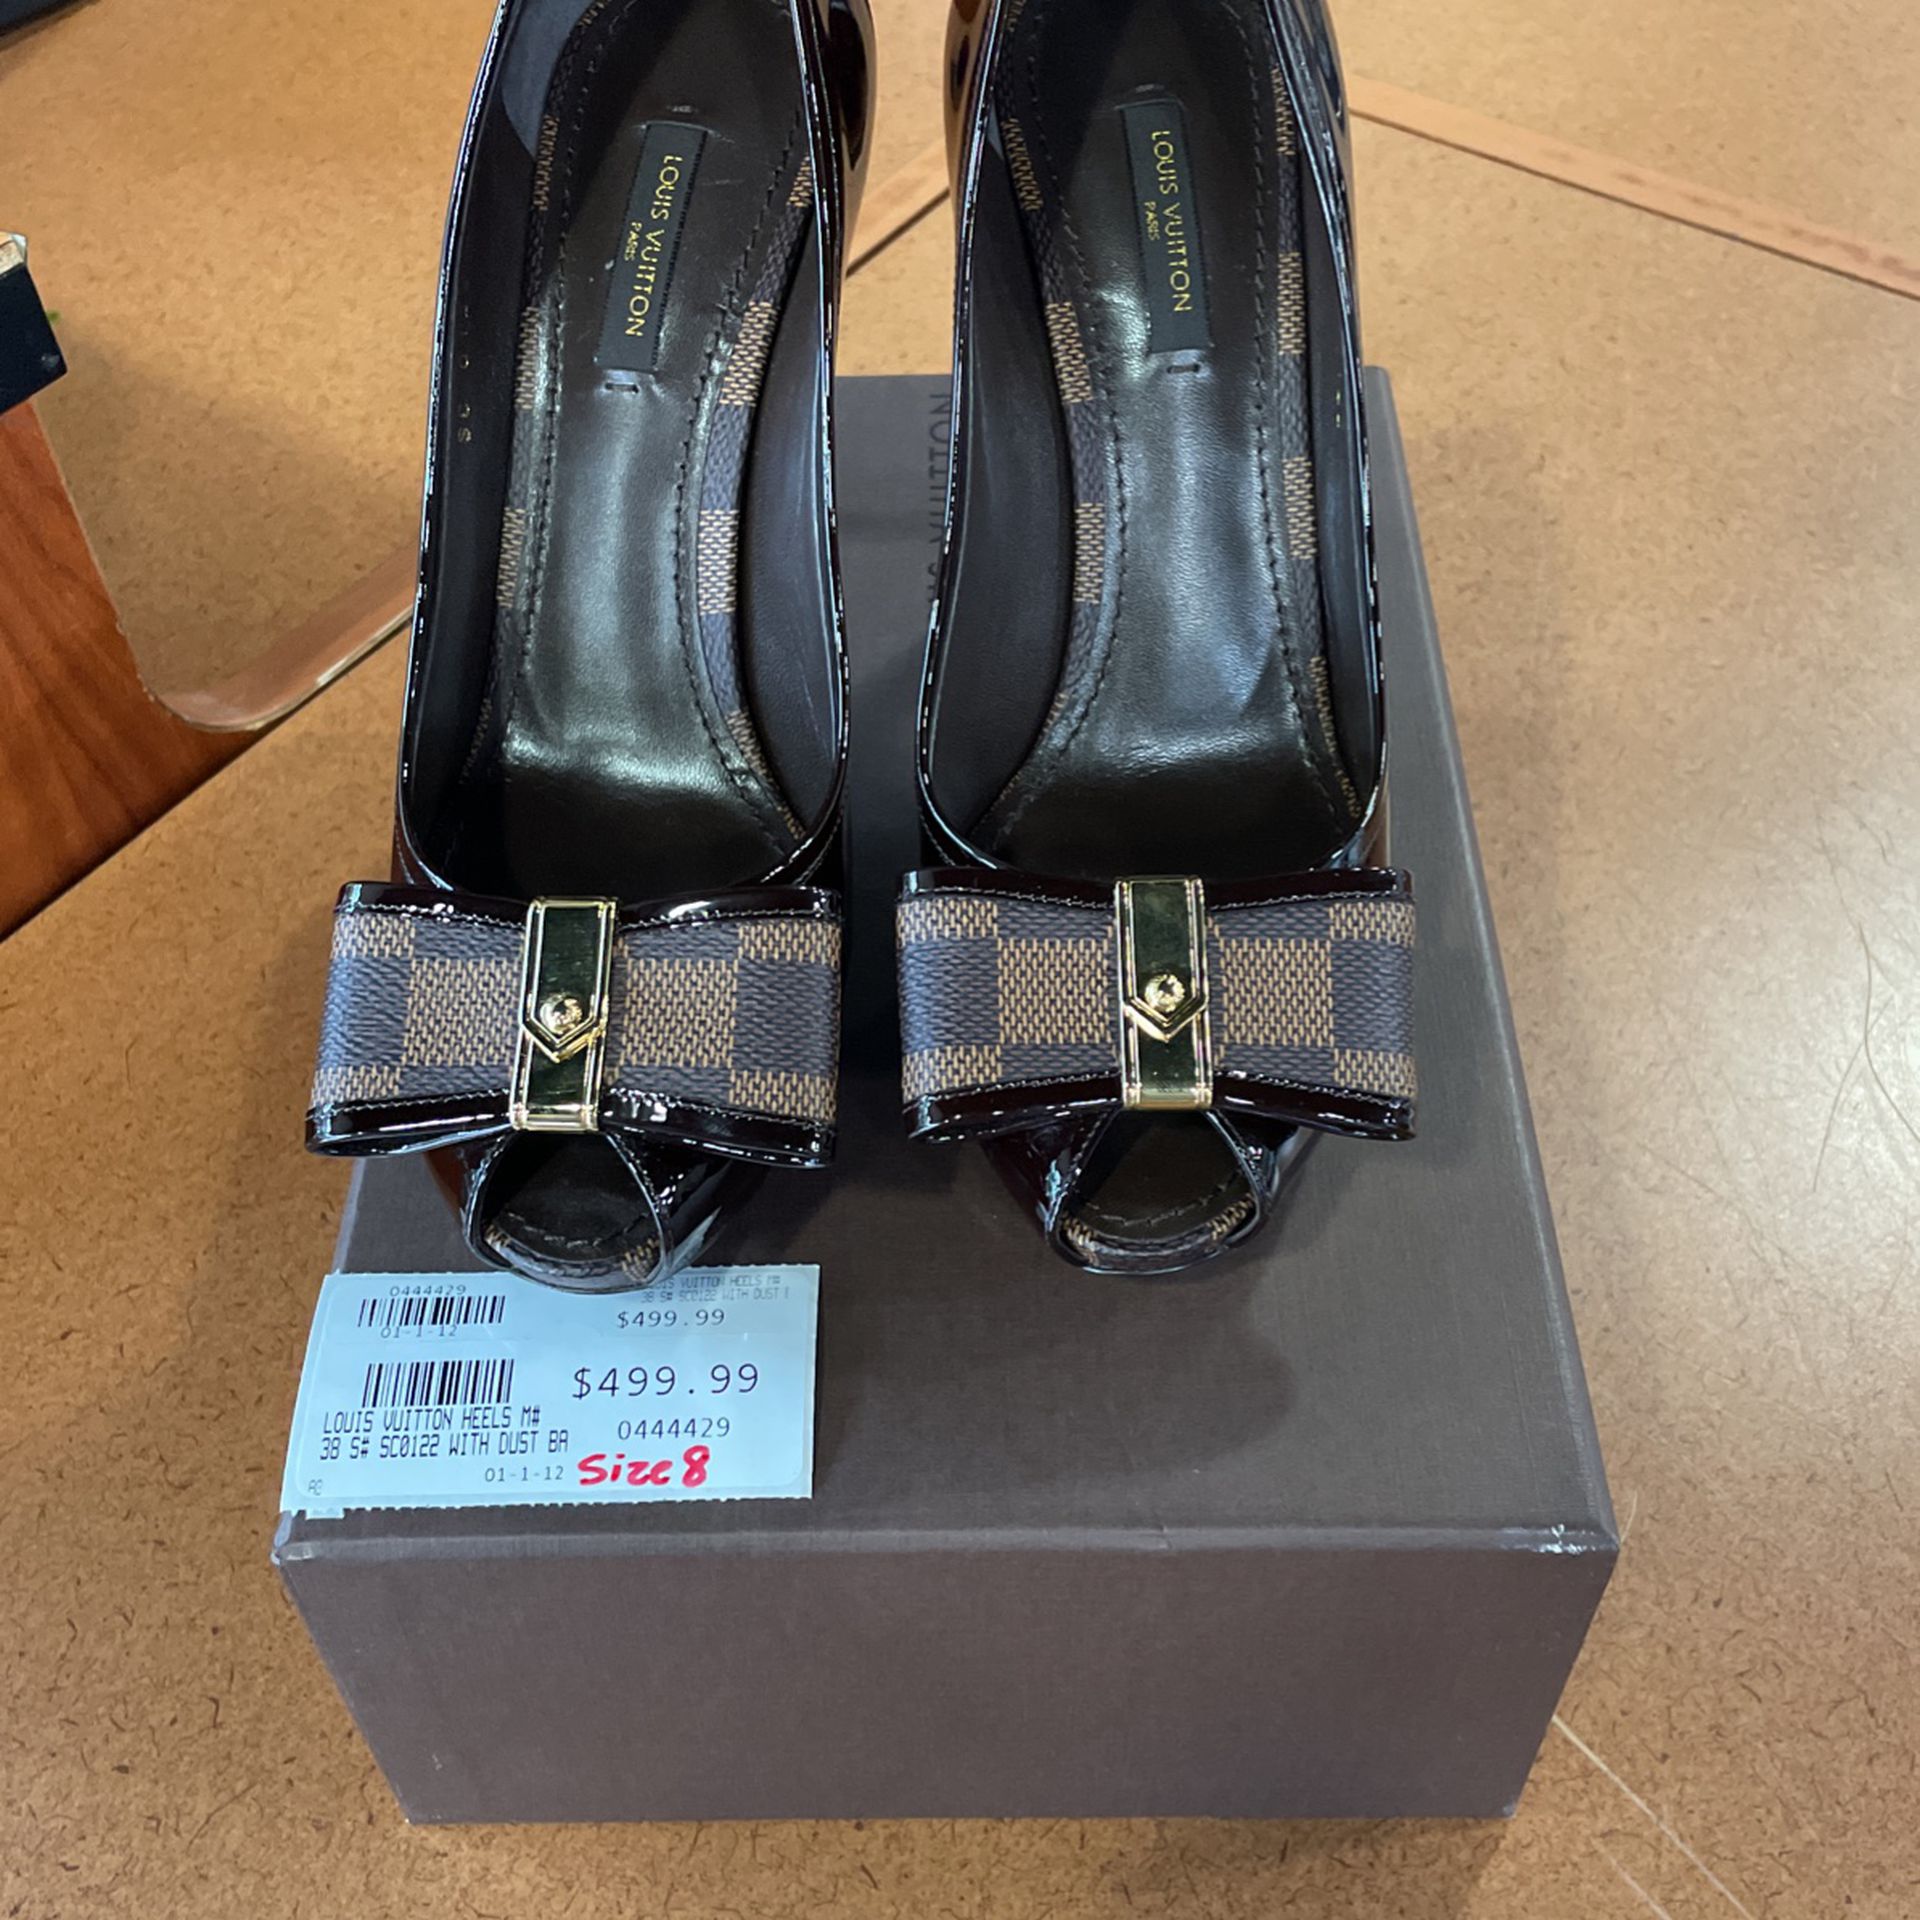 Louis Vuitton Shoes / Heels / Pumps - Authenticated for Sale in Houston, TX  - OfferUp